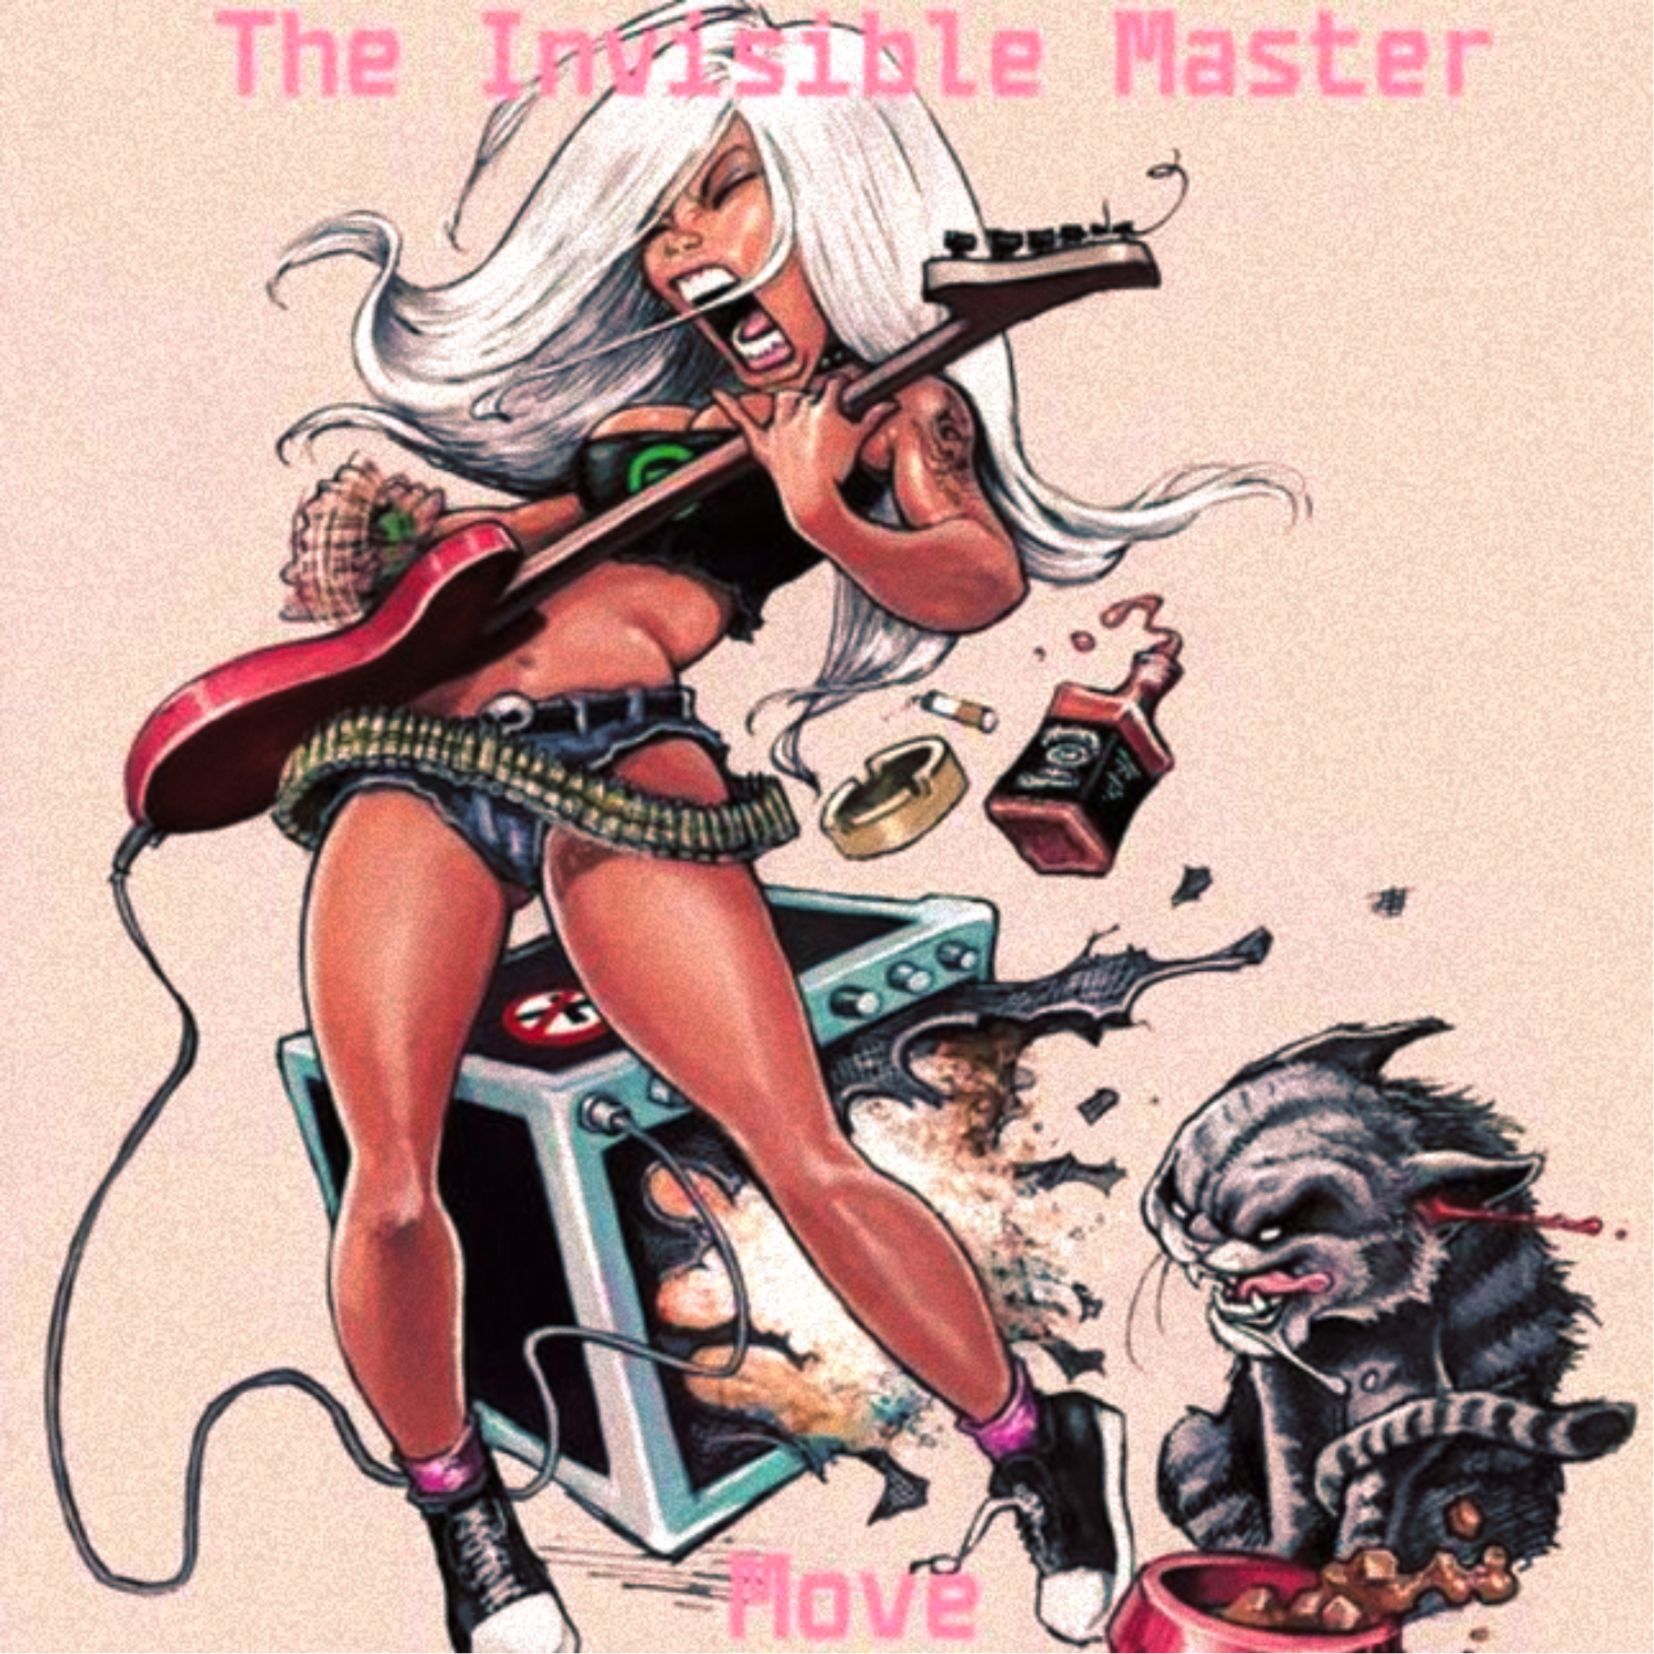 The Invisible Master - Move (Preview)